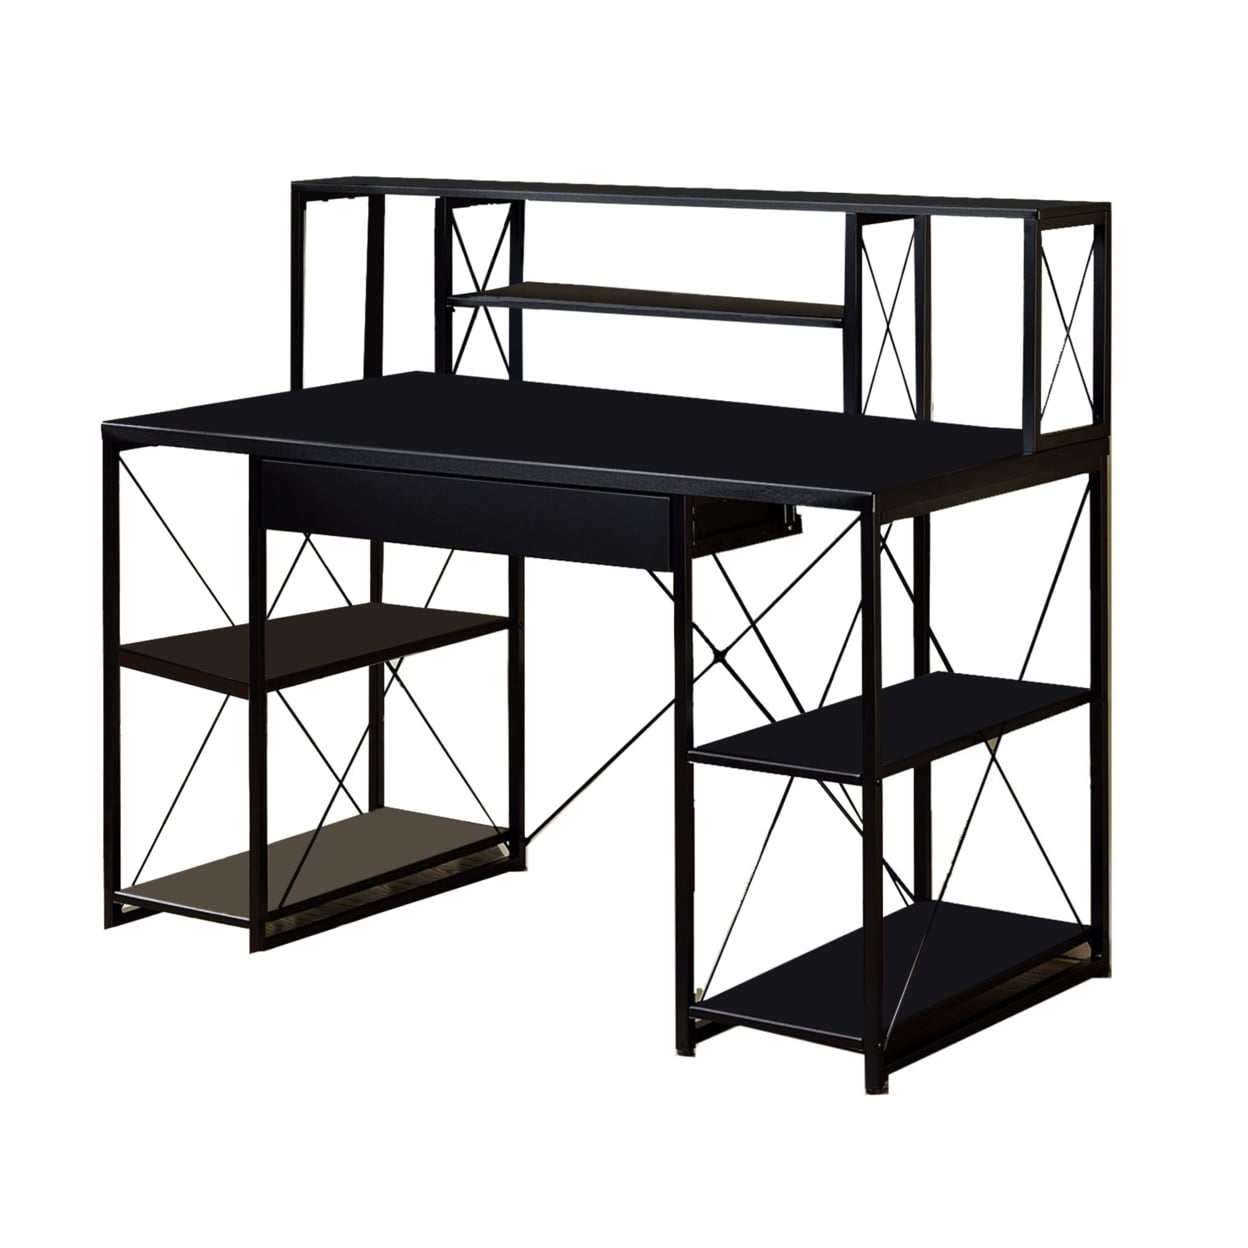 Bm209613 Industrial Style Desk With 4 Open Selves & Bookcase Hutch - Black - 41 X 24 X 47 In.